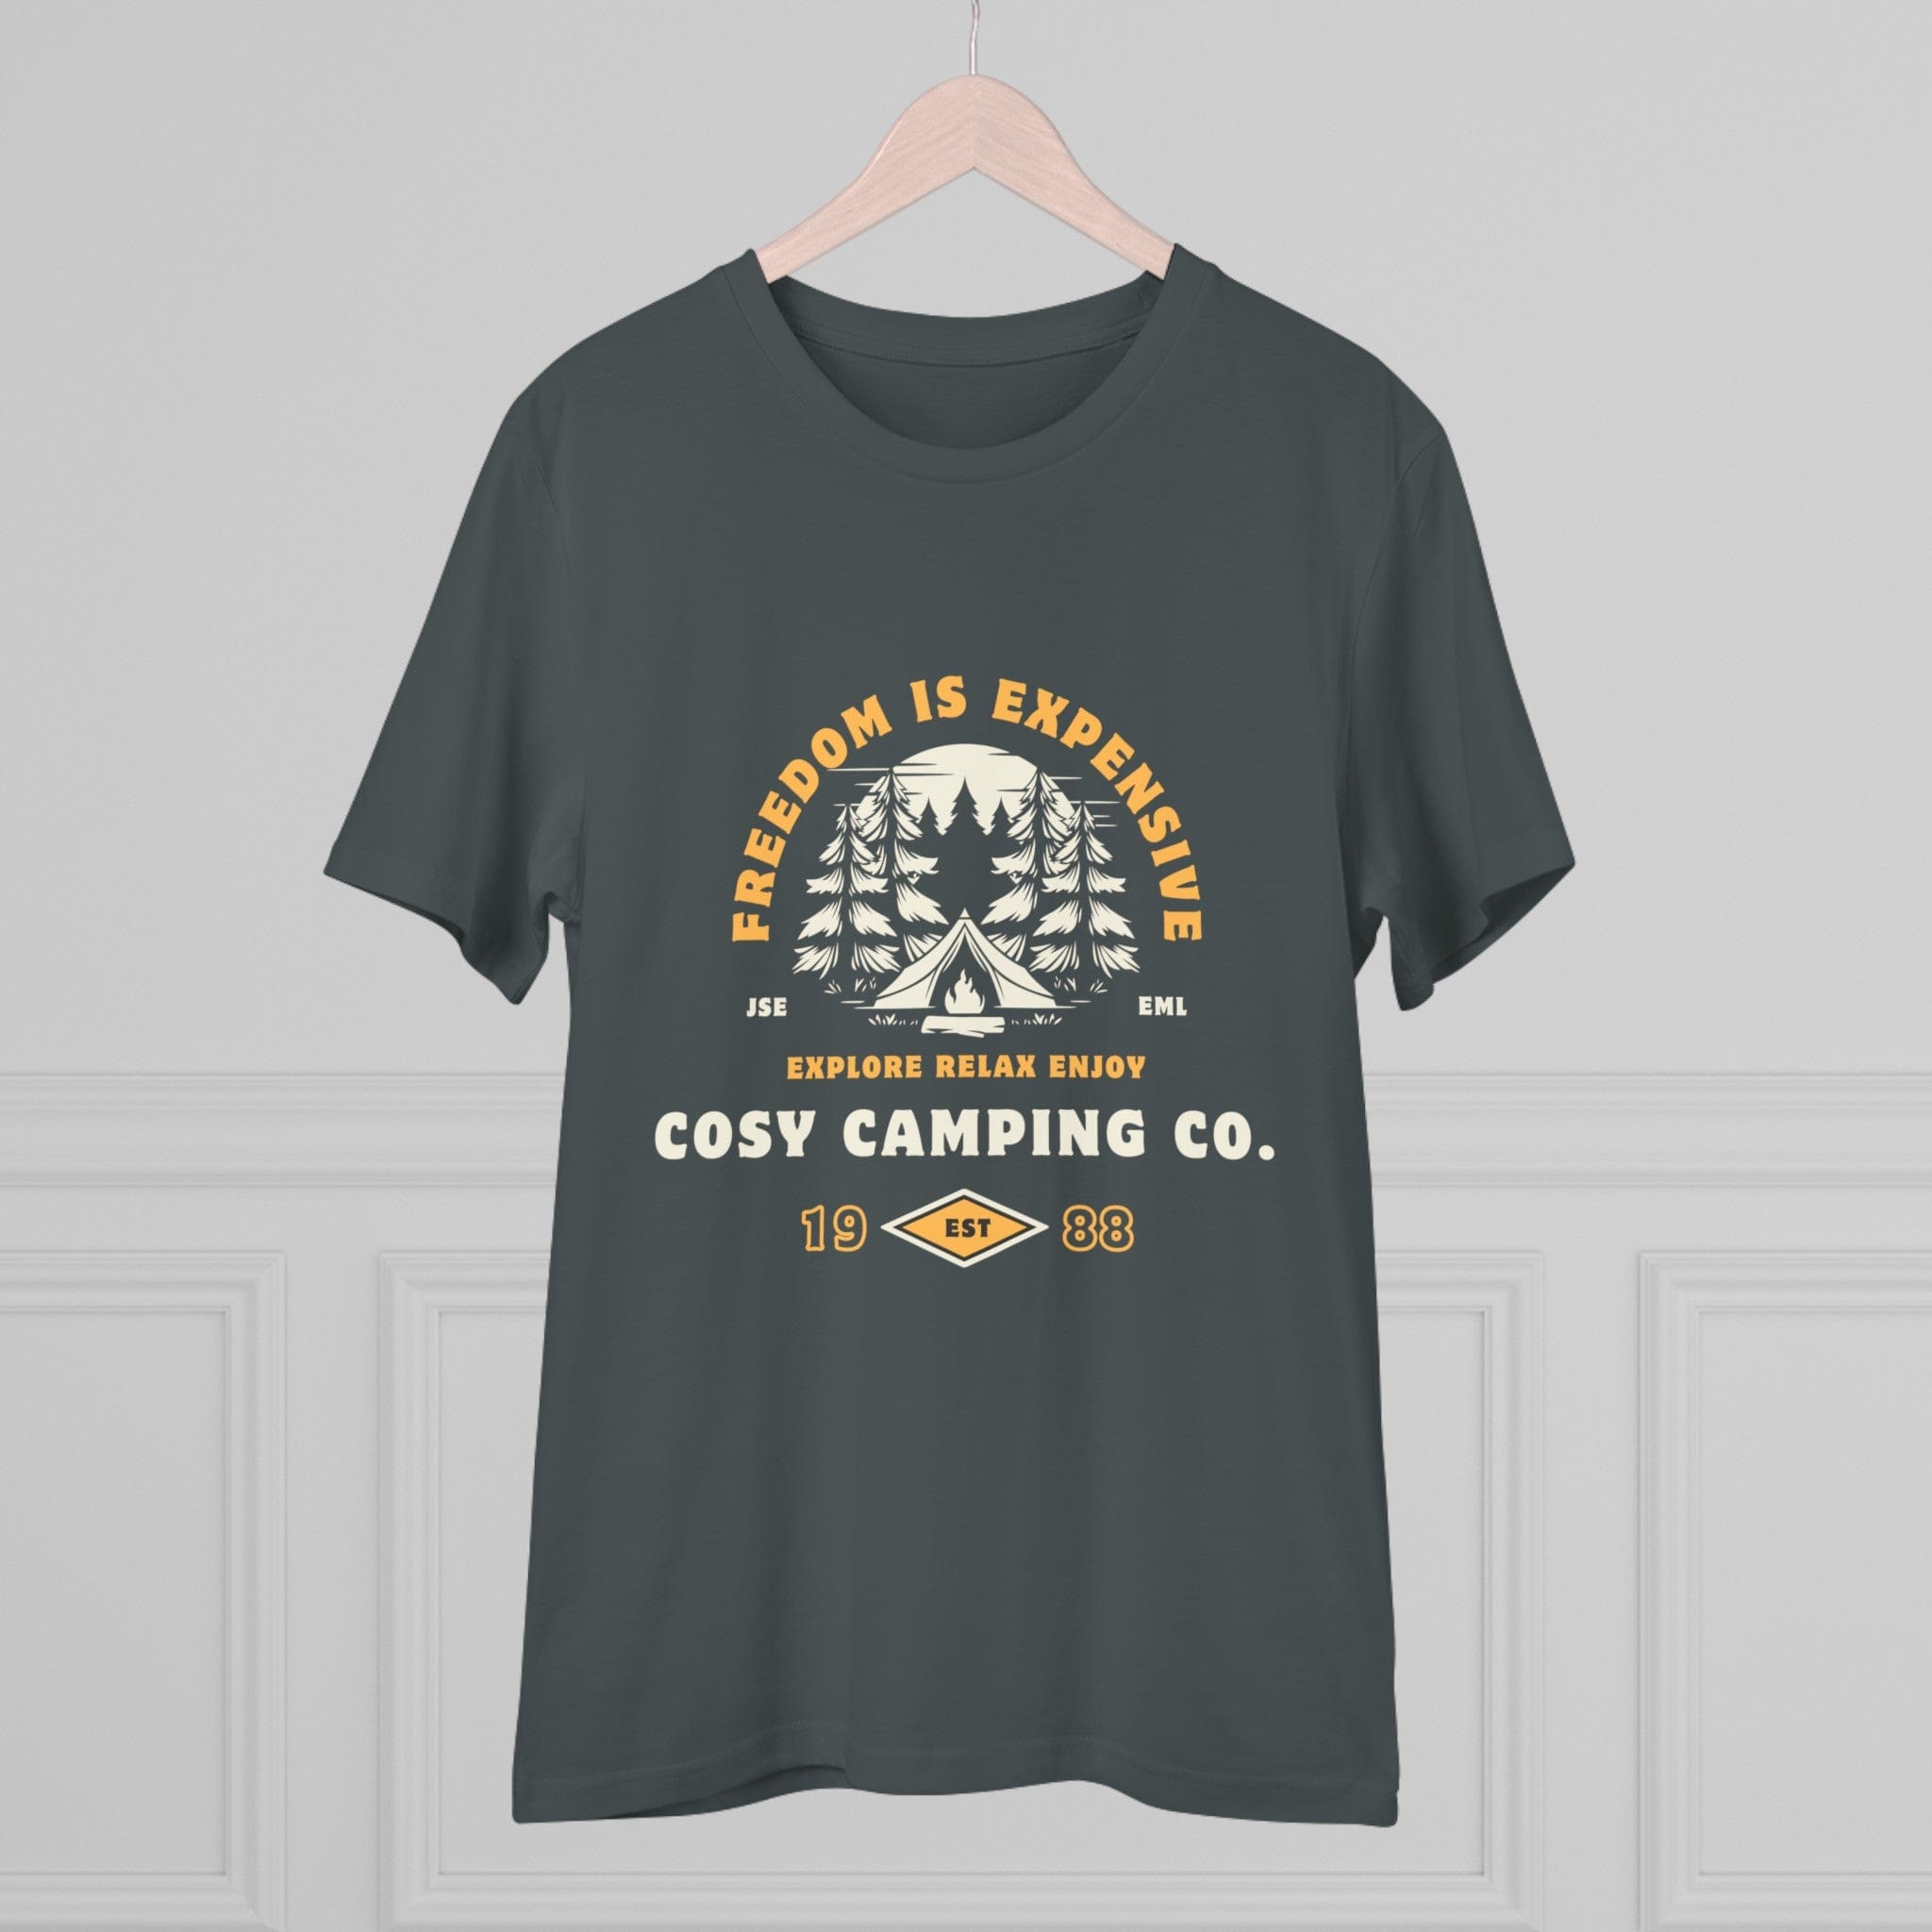 Organic Freedom T-shirt T-Shirt Cosy Camping Co. Anthracite 2XS 